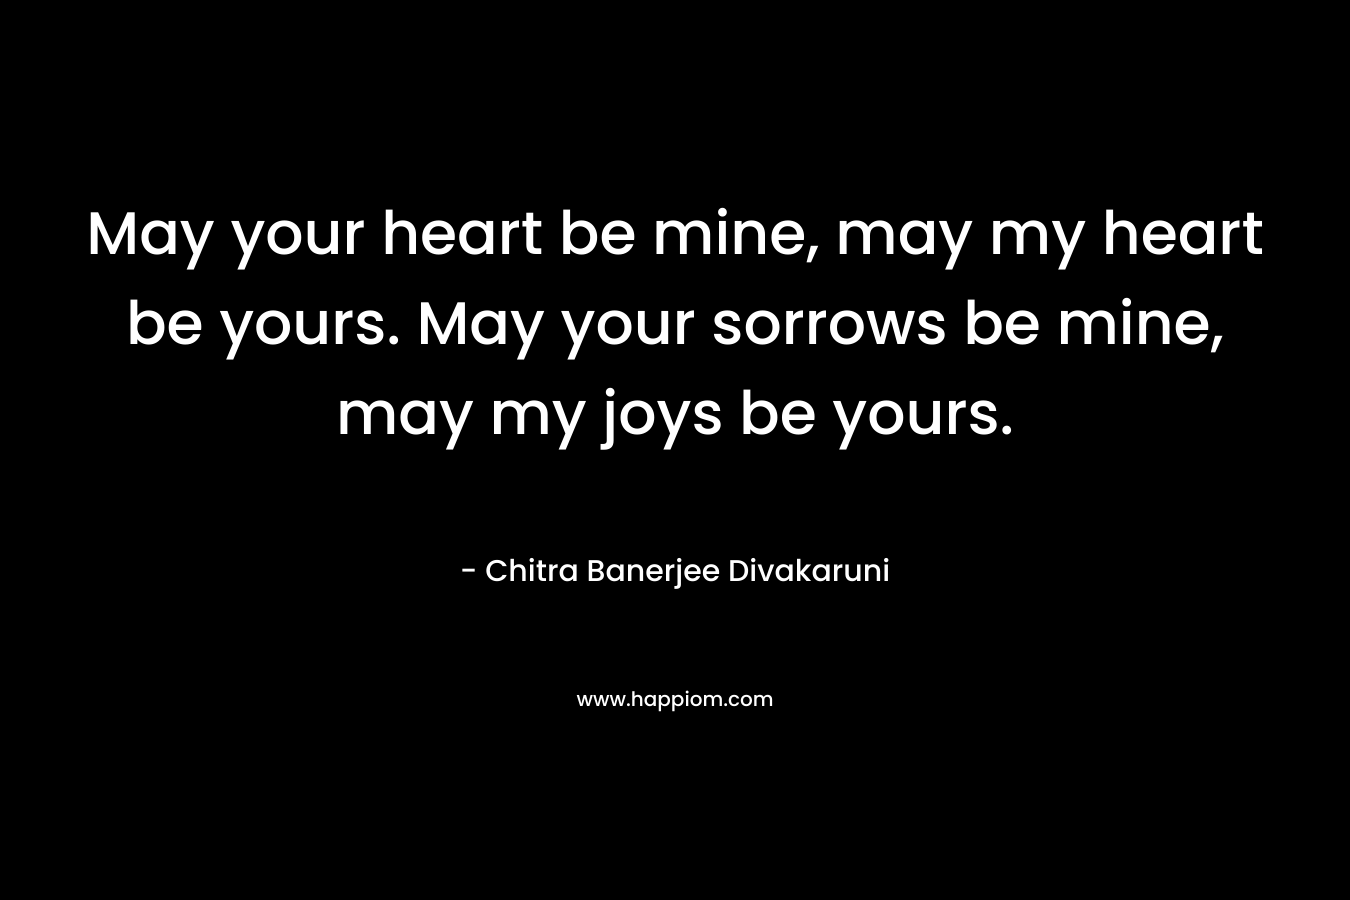 May your heart be mine, may my heart be yours. May your sorrows be mine, may my joys be yours.